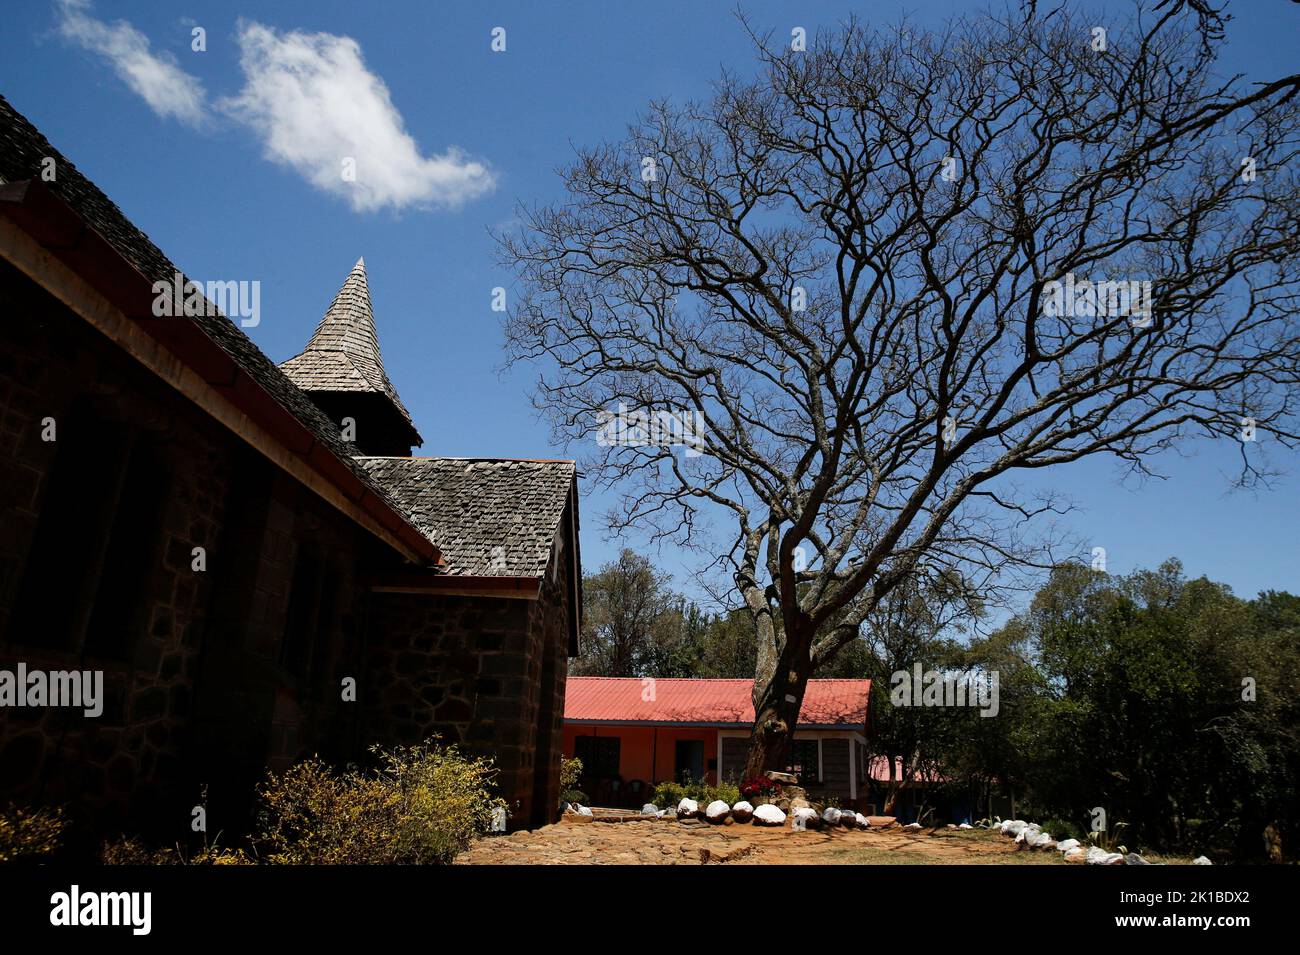 A Brazilian Rosewood tree planted by Major Geoffrey Baynes during the visit by Queen Elizabeth II in February 2, 1952 is seen at the St Philips Anglican Church of Kenya (ACK) during a thanksgiving memorial service for the late Queen Elizabeth II, in Naro Moru, Kenya September 17, 2022. REUTERS/Thomas Mukoya Stock Photo